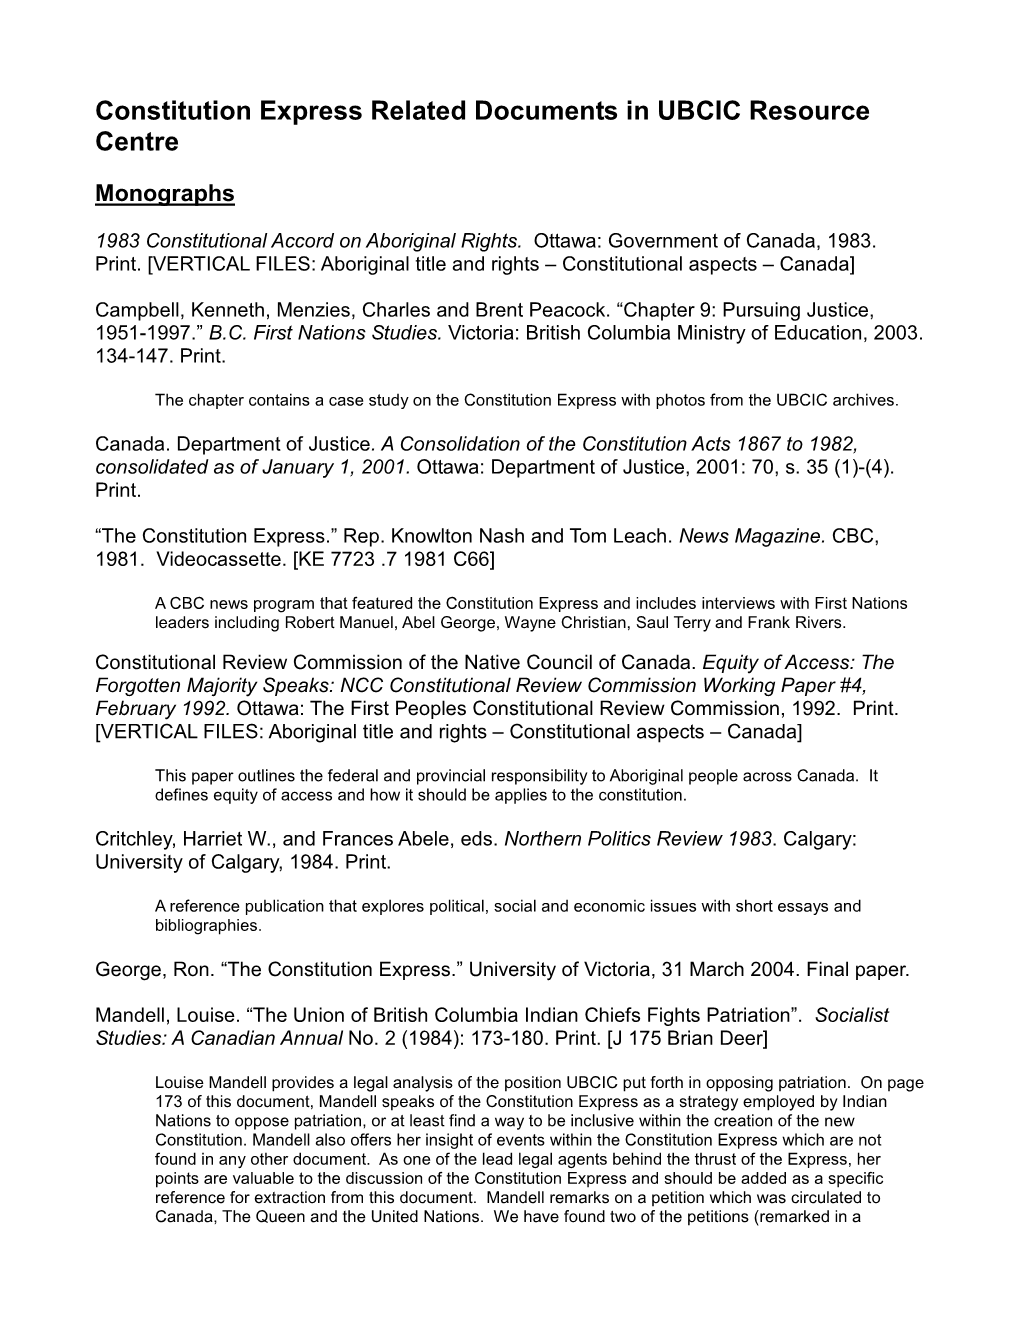 Constitution Express Related Documents in UBCIC Resource Centre